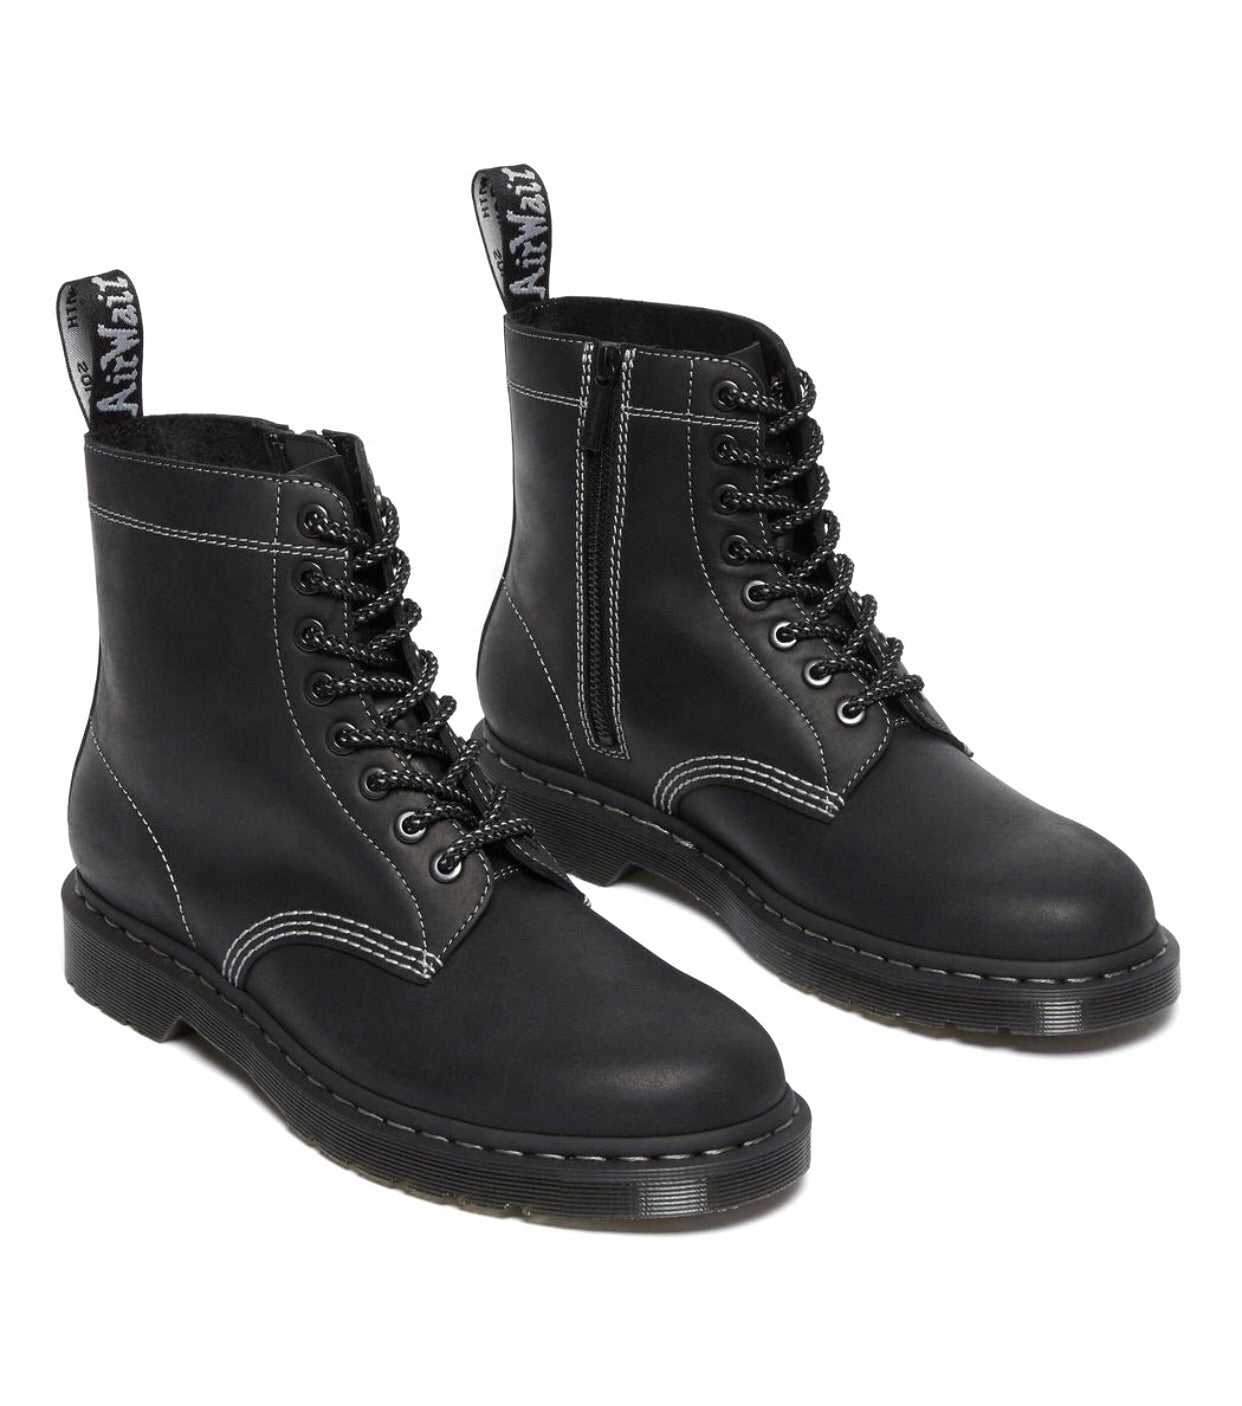 Dr. Martens 1460 Black Streeter Pascal Zipped Ankle 8 Eyelet Boot